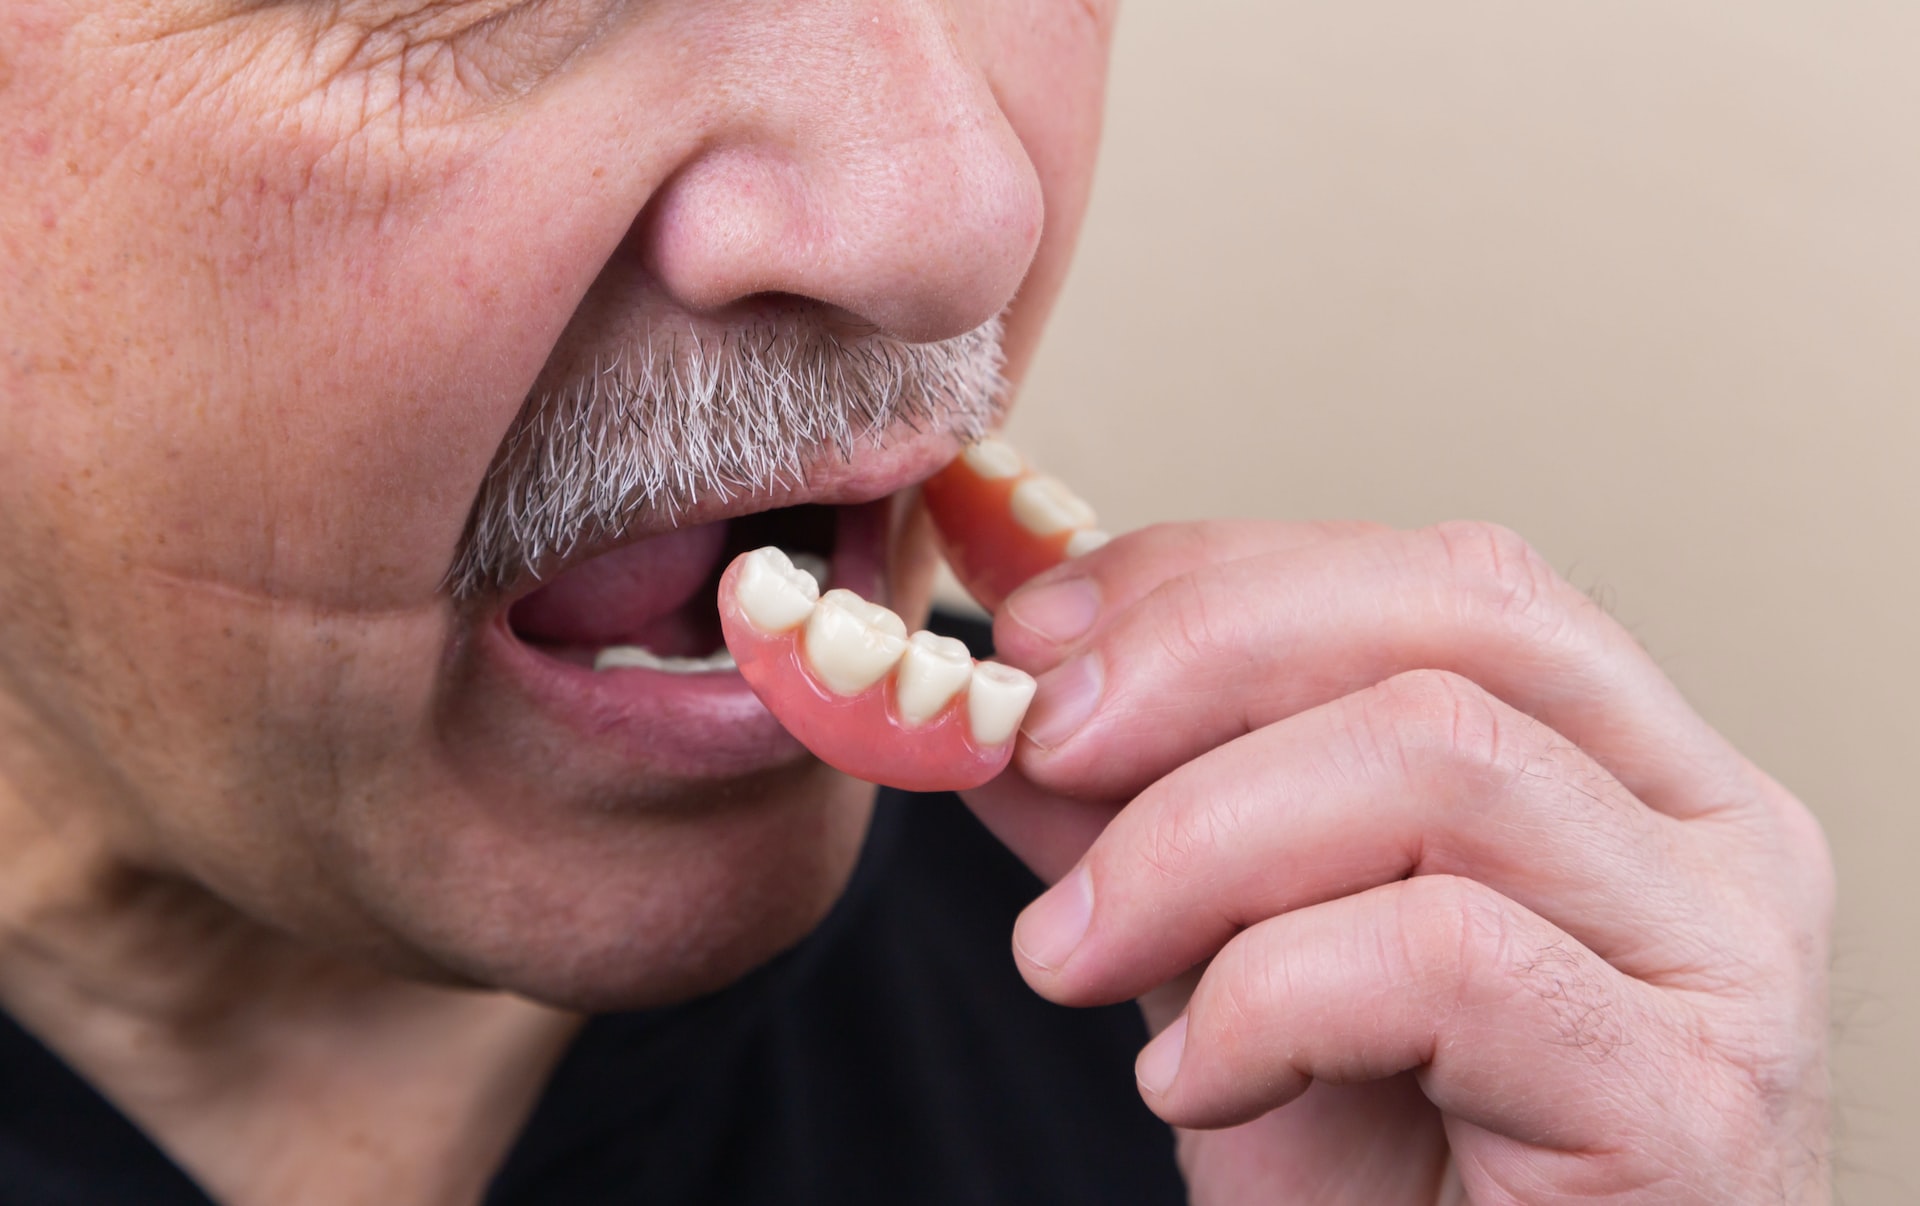 partial and full dentures - man putting dentures in mouth